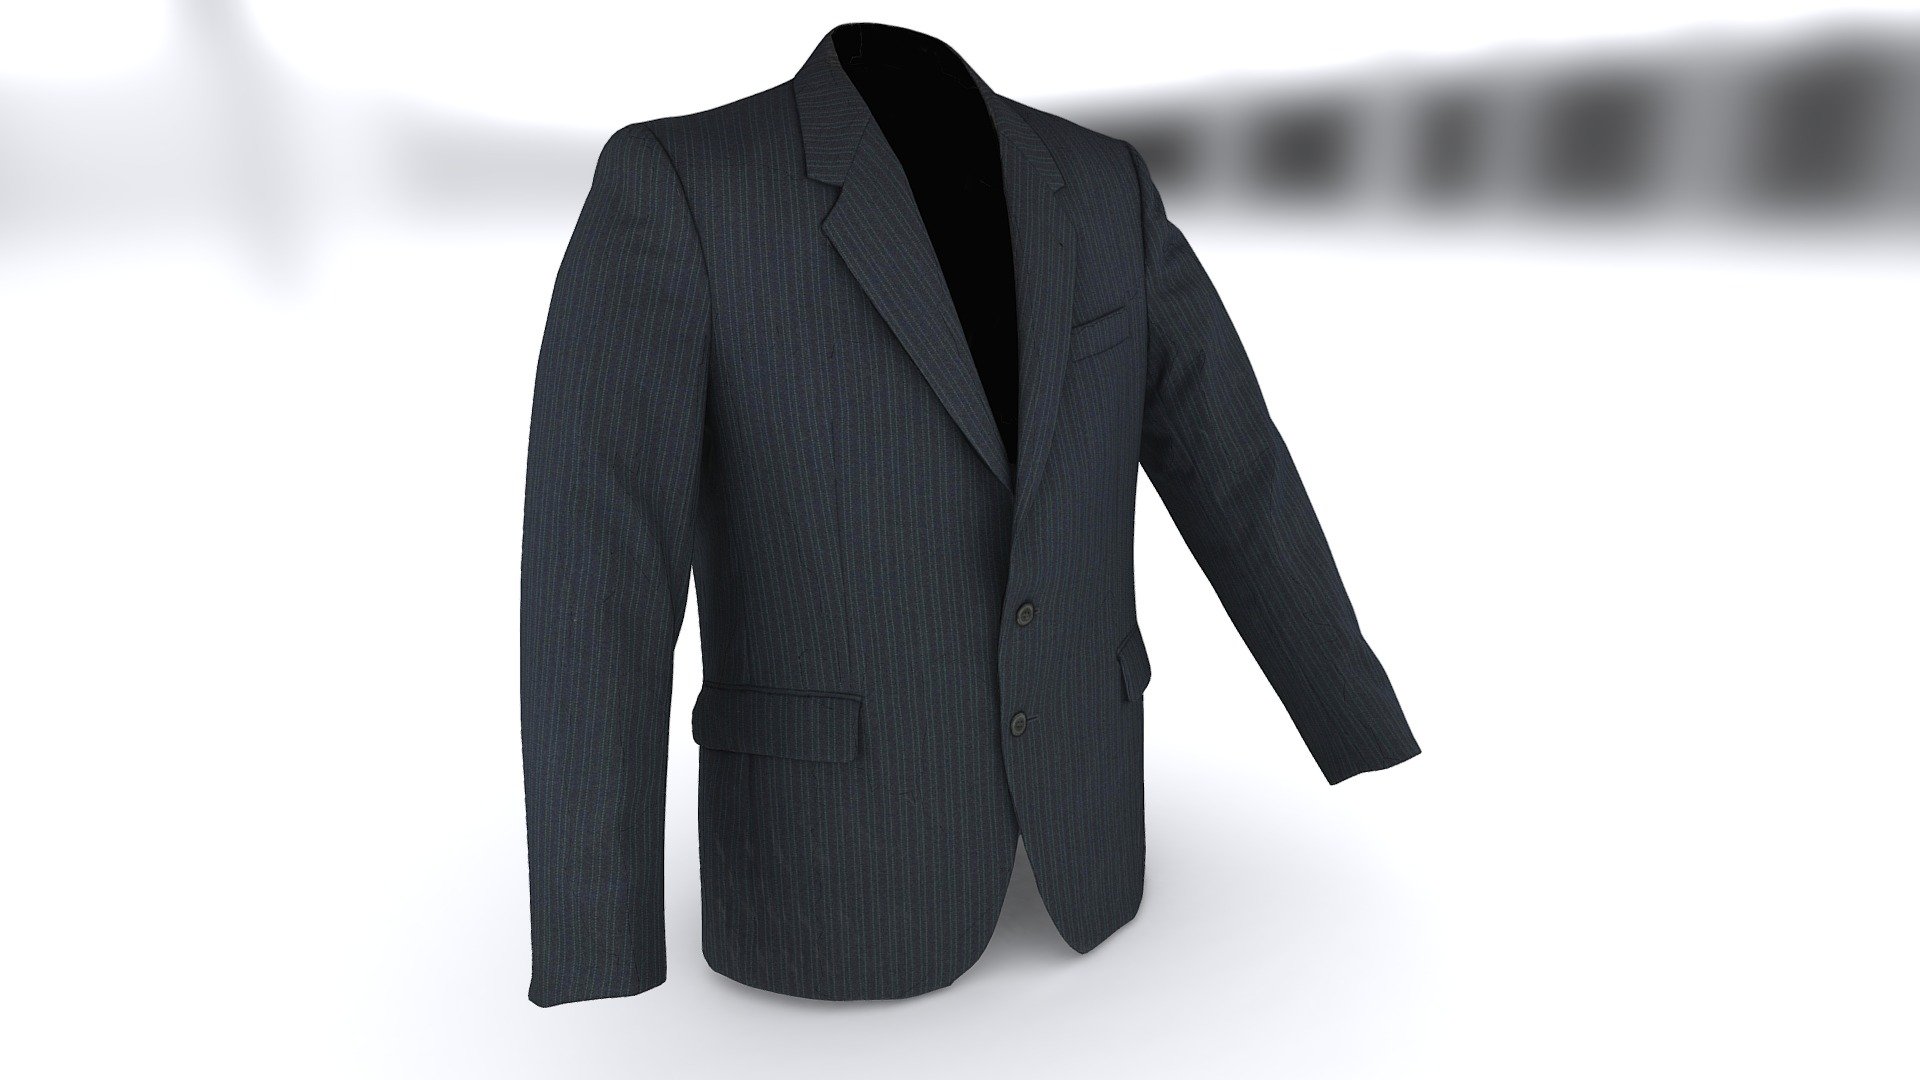 This scan demonstrates the possibilities of using 3D models in fashion as well
The interesting thing about these models is that they are formed as a shell, so that the models can be combined in configurators
The model is part of the suit we scanned.
Suit - Jacket
Suit - Vest
Suit - Shirt
Suit - Pants - Suit - Jacket - Buy Royalty Free 3D model by VRModelFactory 3d model